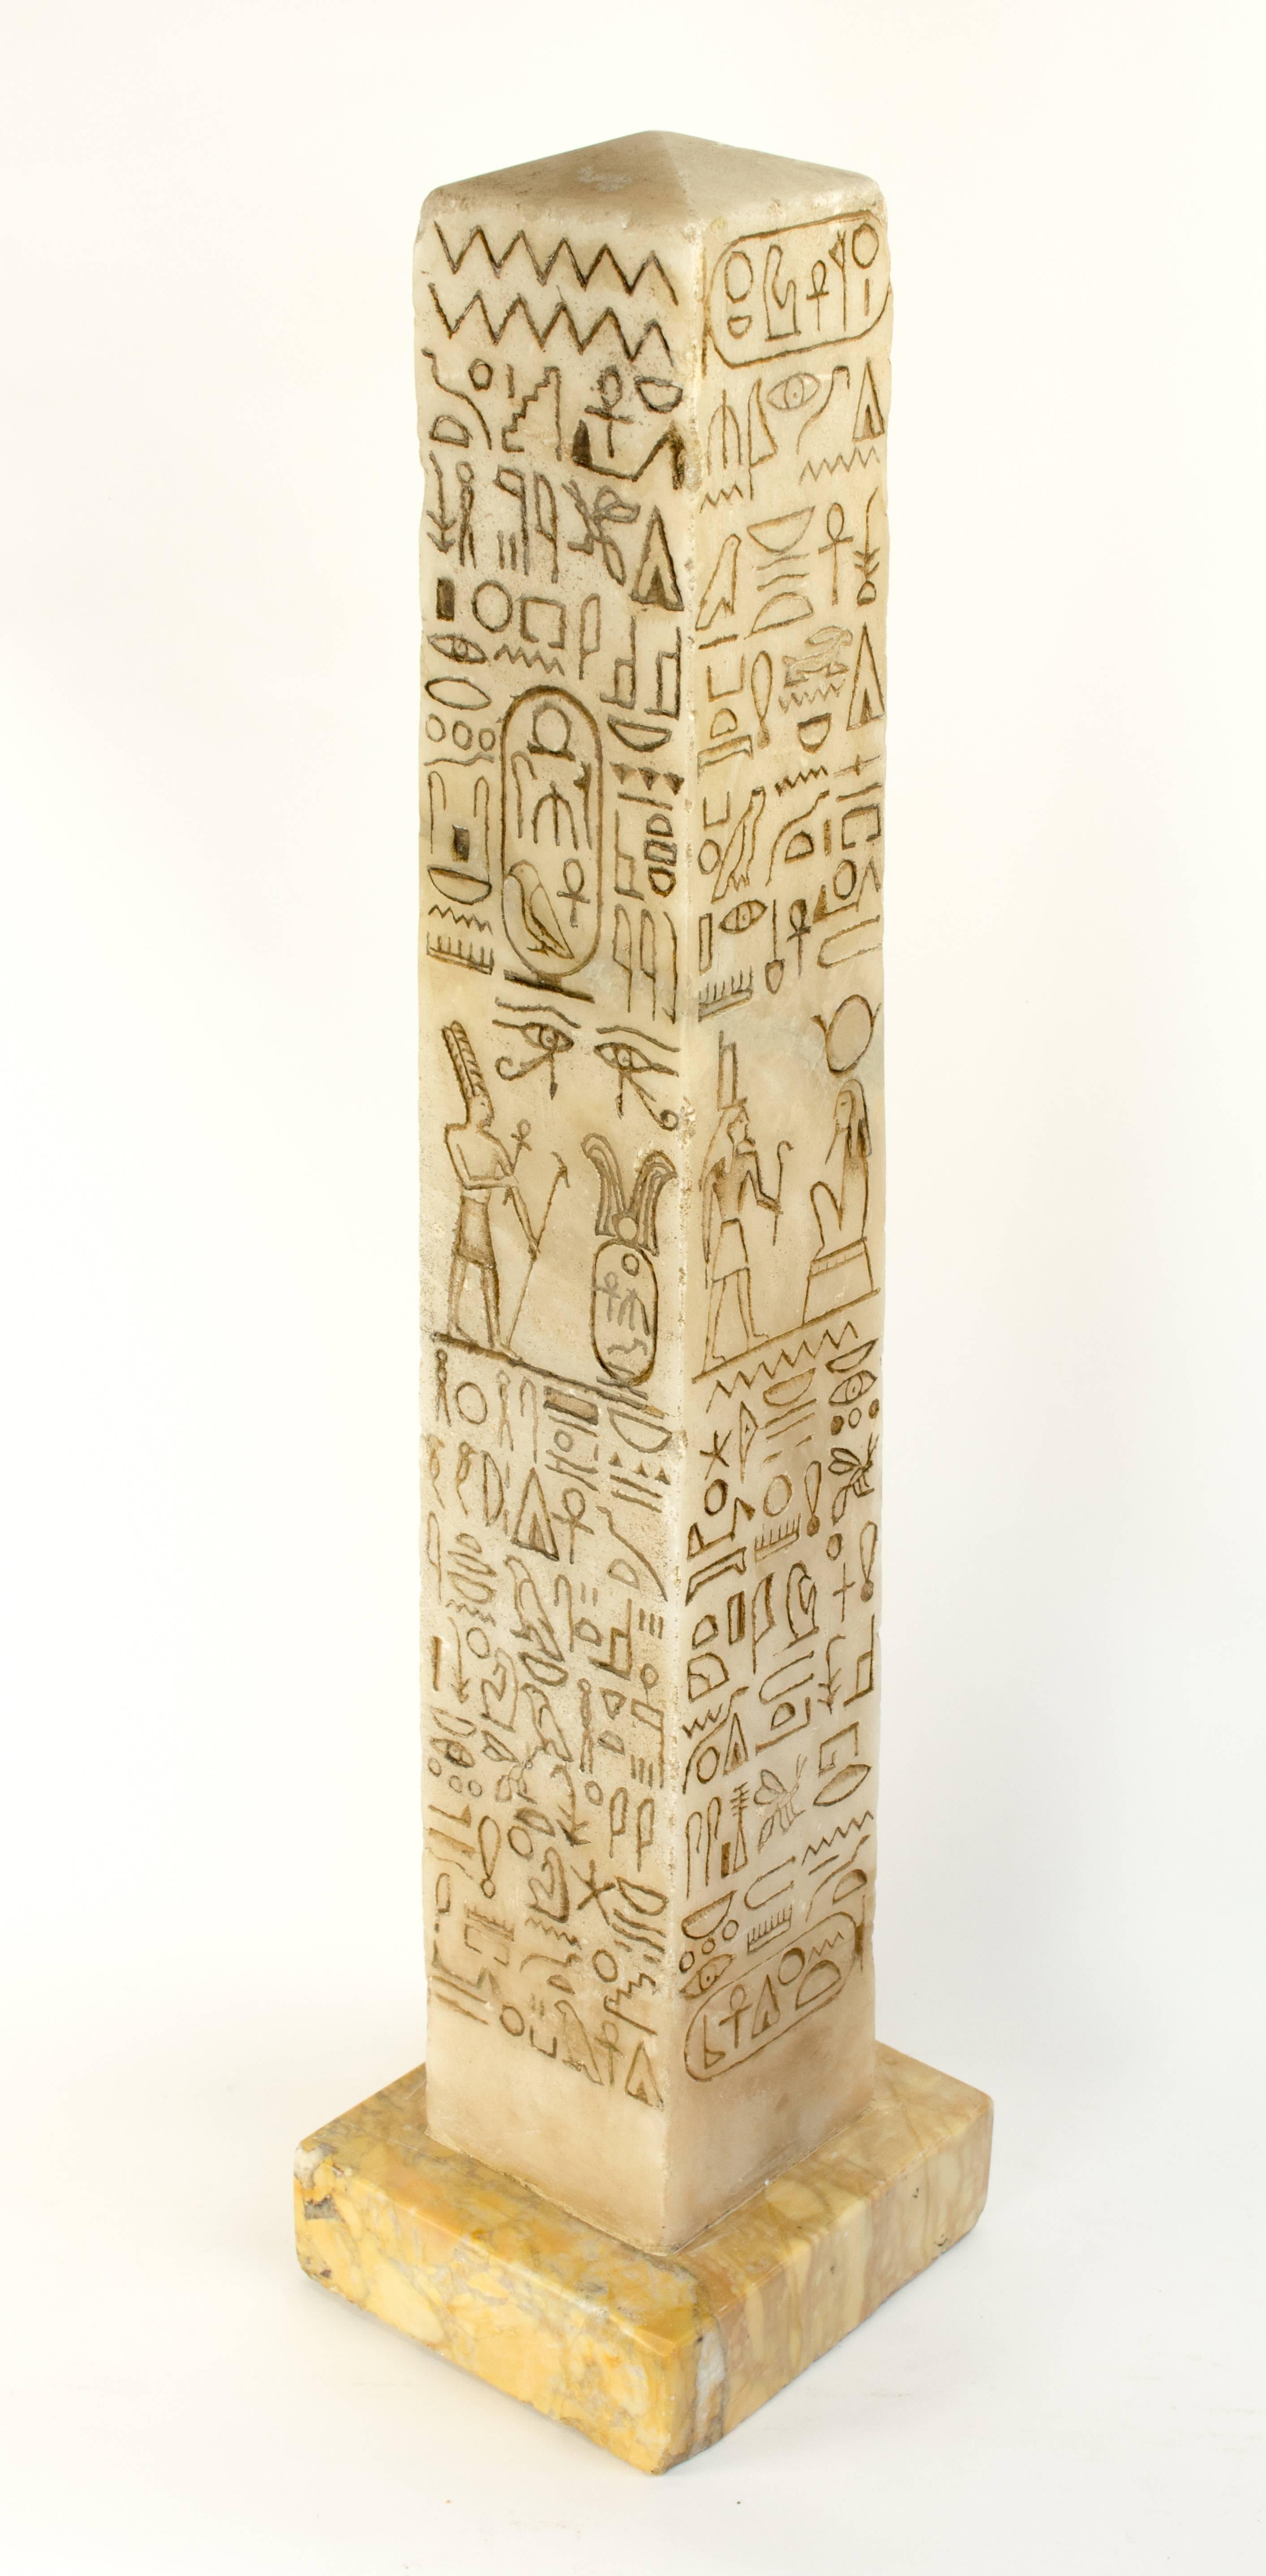 This charming alabaster model set on a yellow marble base is carved on four sides with a lively group of hieroglyphics. It’s unusual shape provides a large surface for a striking group of hieroglyphic interpretations. 

The model doesn’t represent